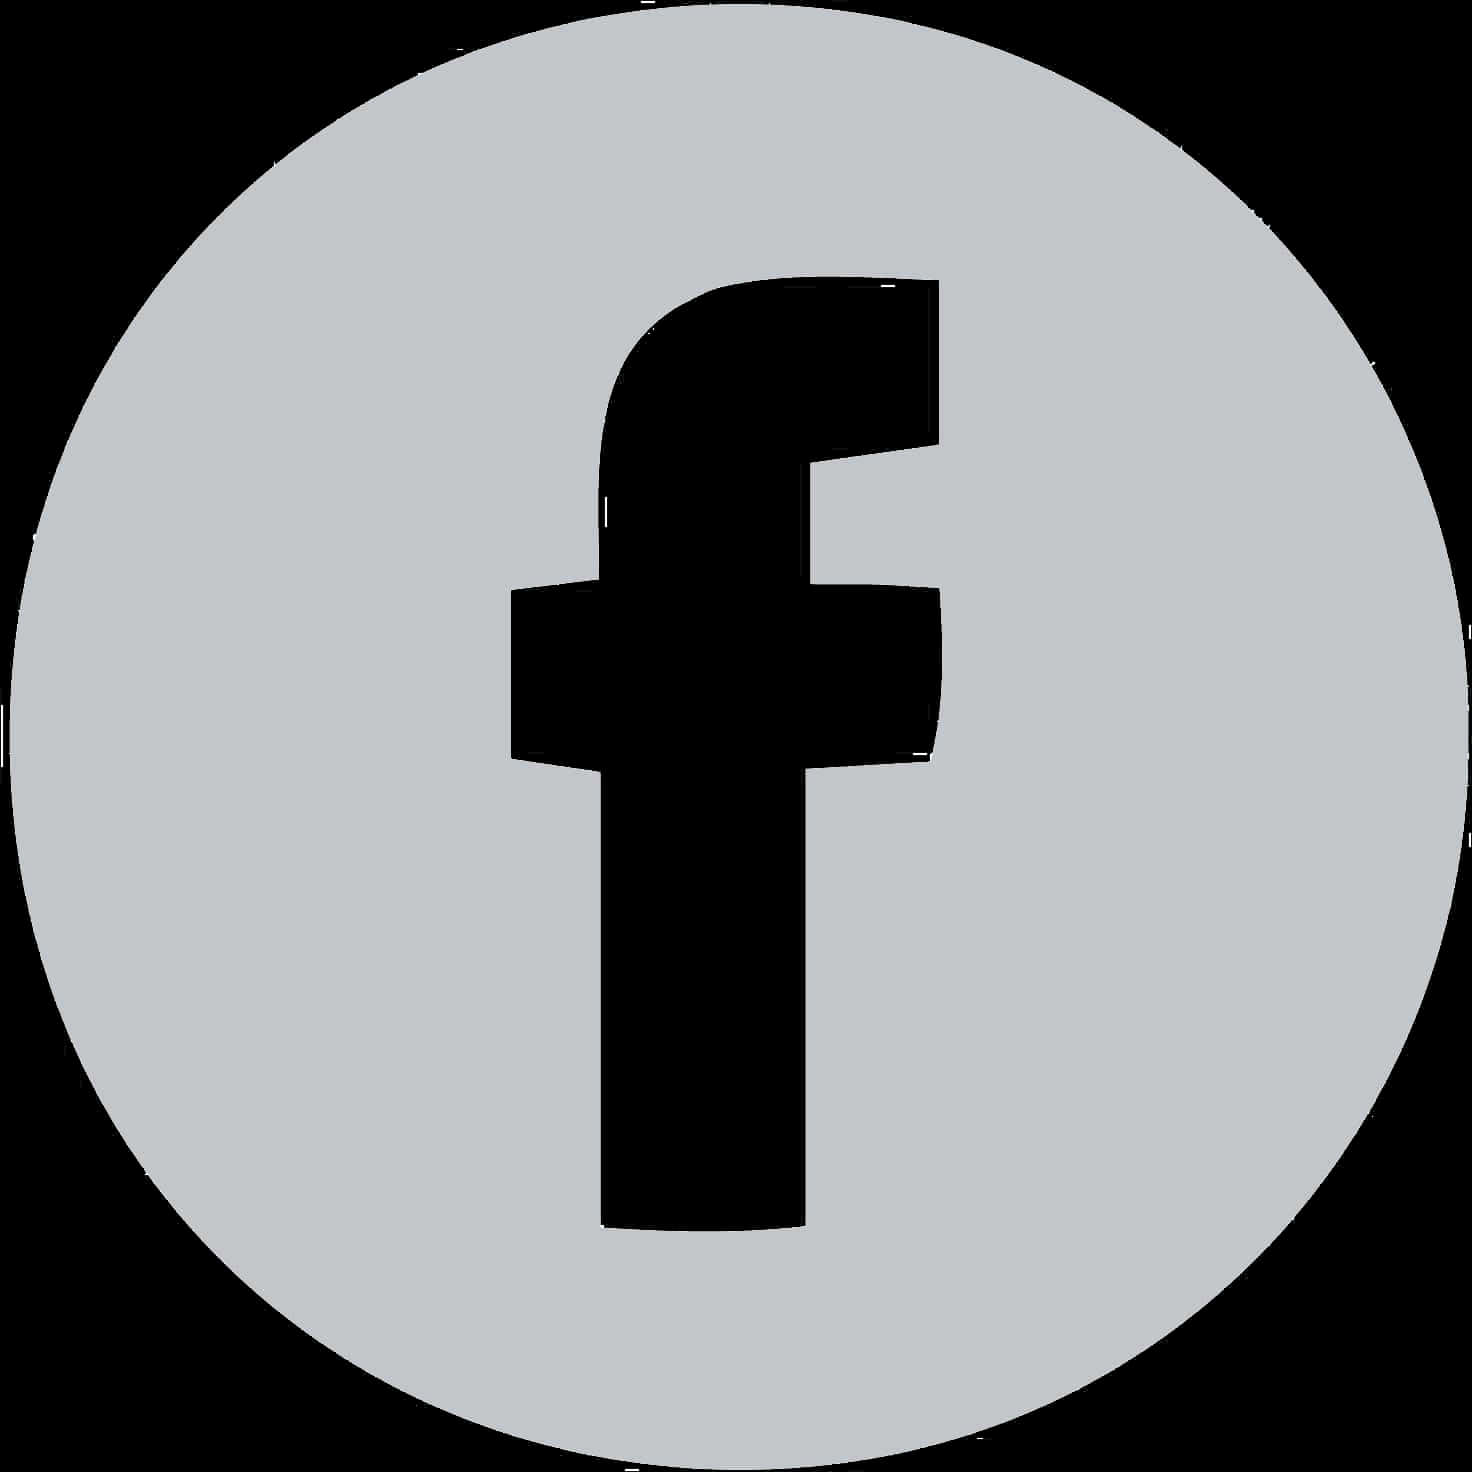 Facebook Icon White Png